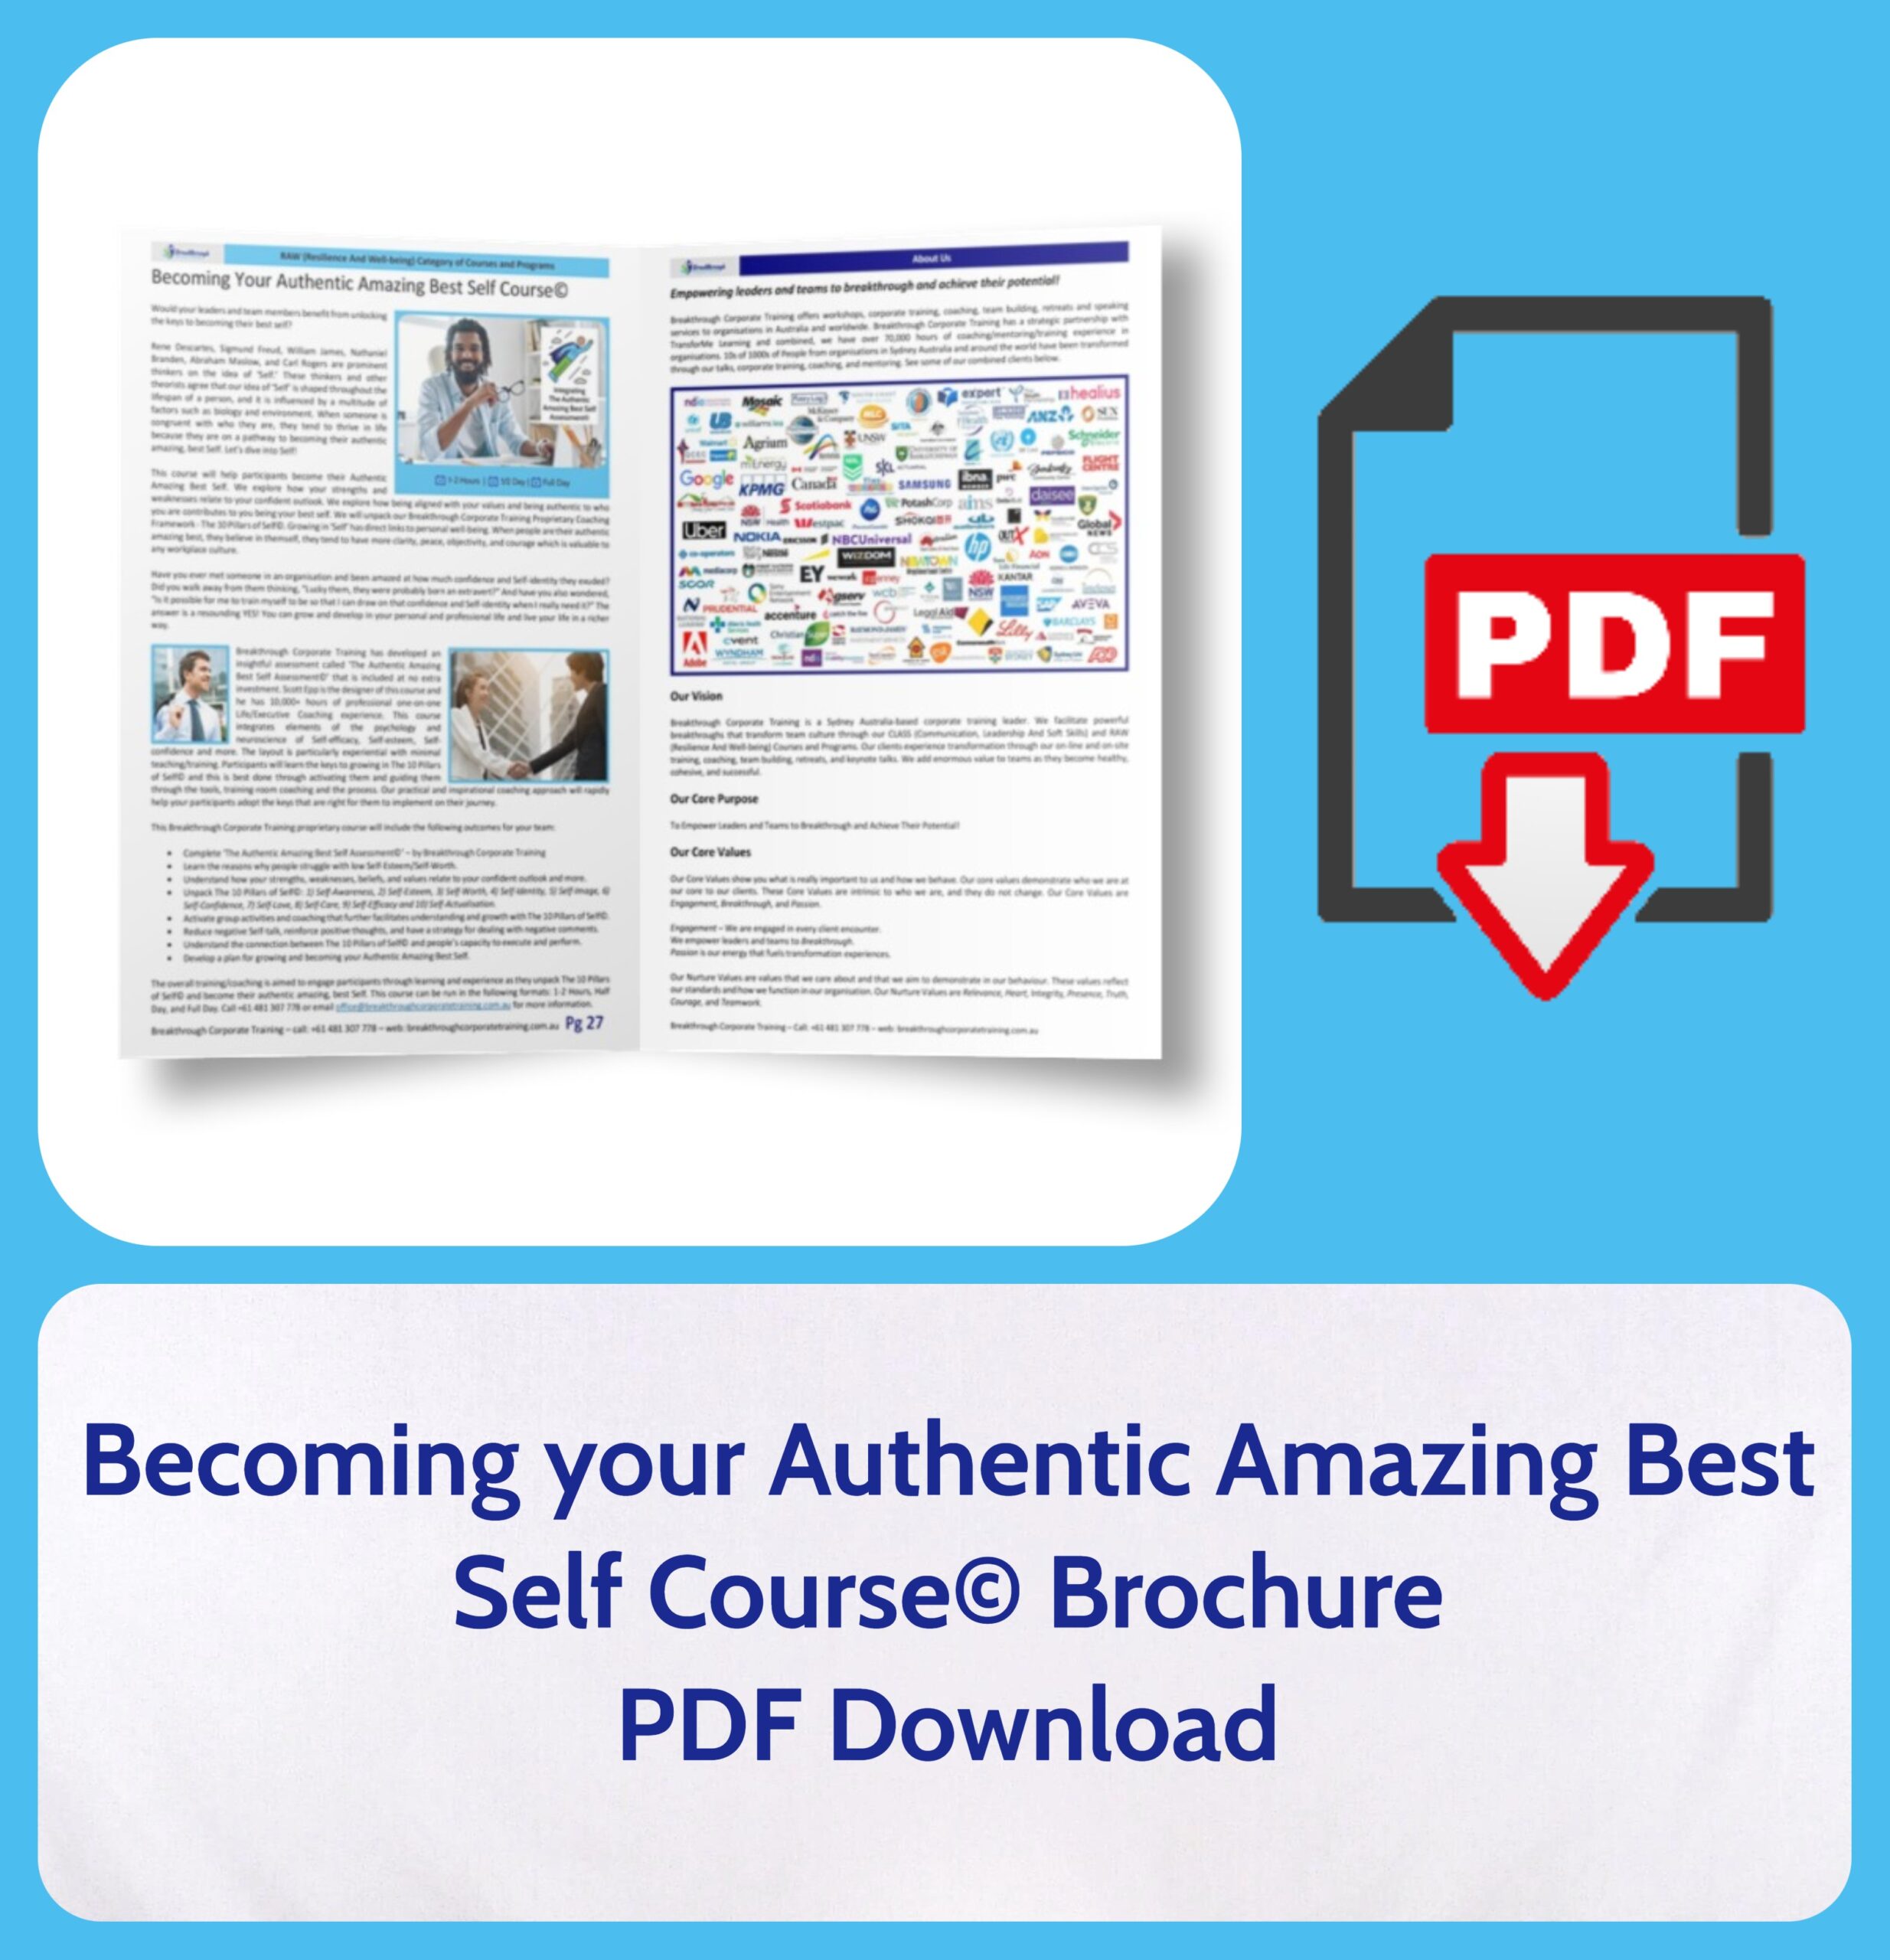 Becoming your Authentic Amazing Best Self Course